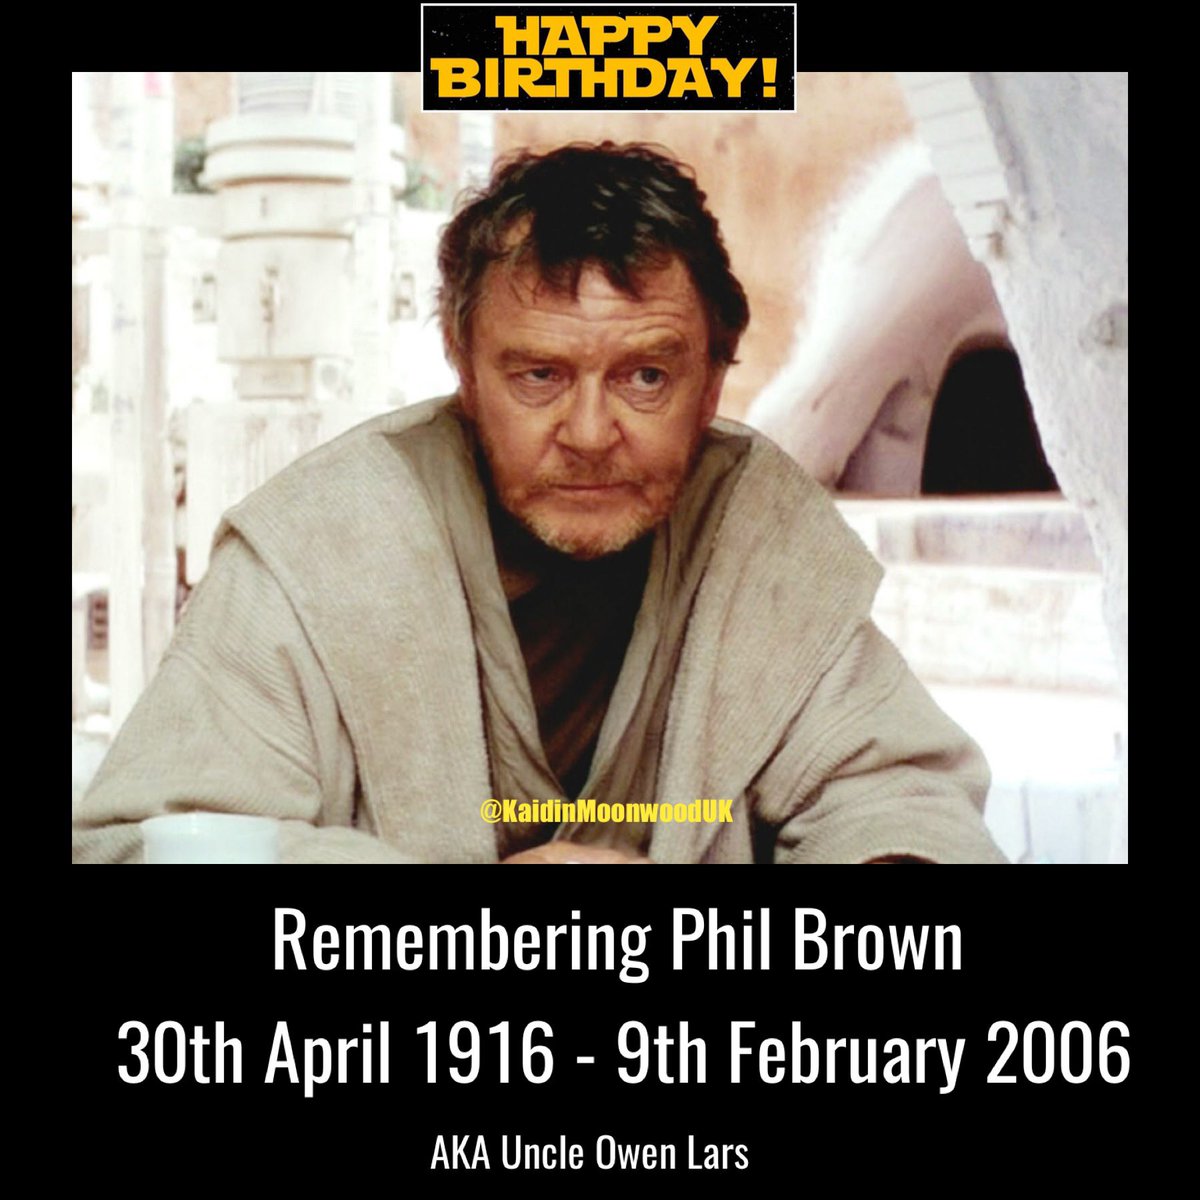 Remembering Phil Brown aka Uncle Owen Lars. 
30th April 1916 to 9th February 2006.
#StarWarsBirthday #PhilBrown #OwenLars #StarWars #ANewHope #AtOneWithTheForce
starwars.wikia.com/wiki/Phil_Brown